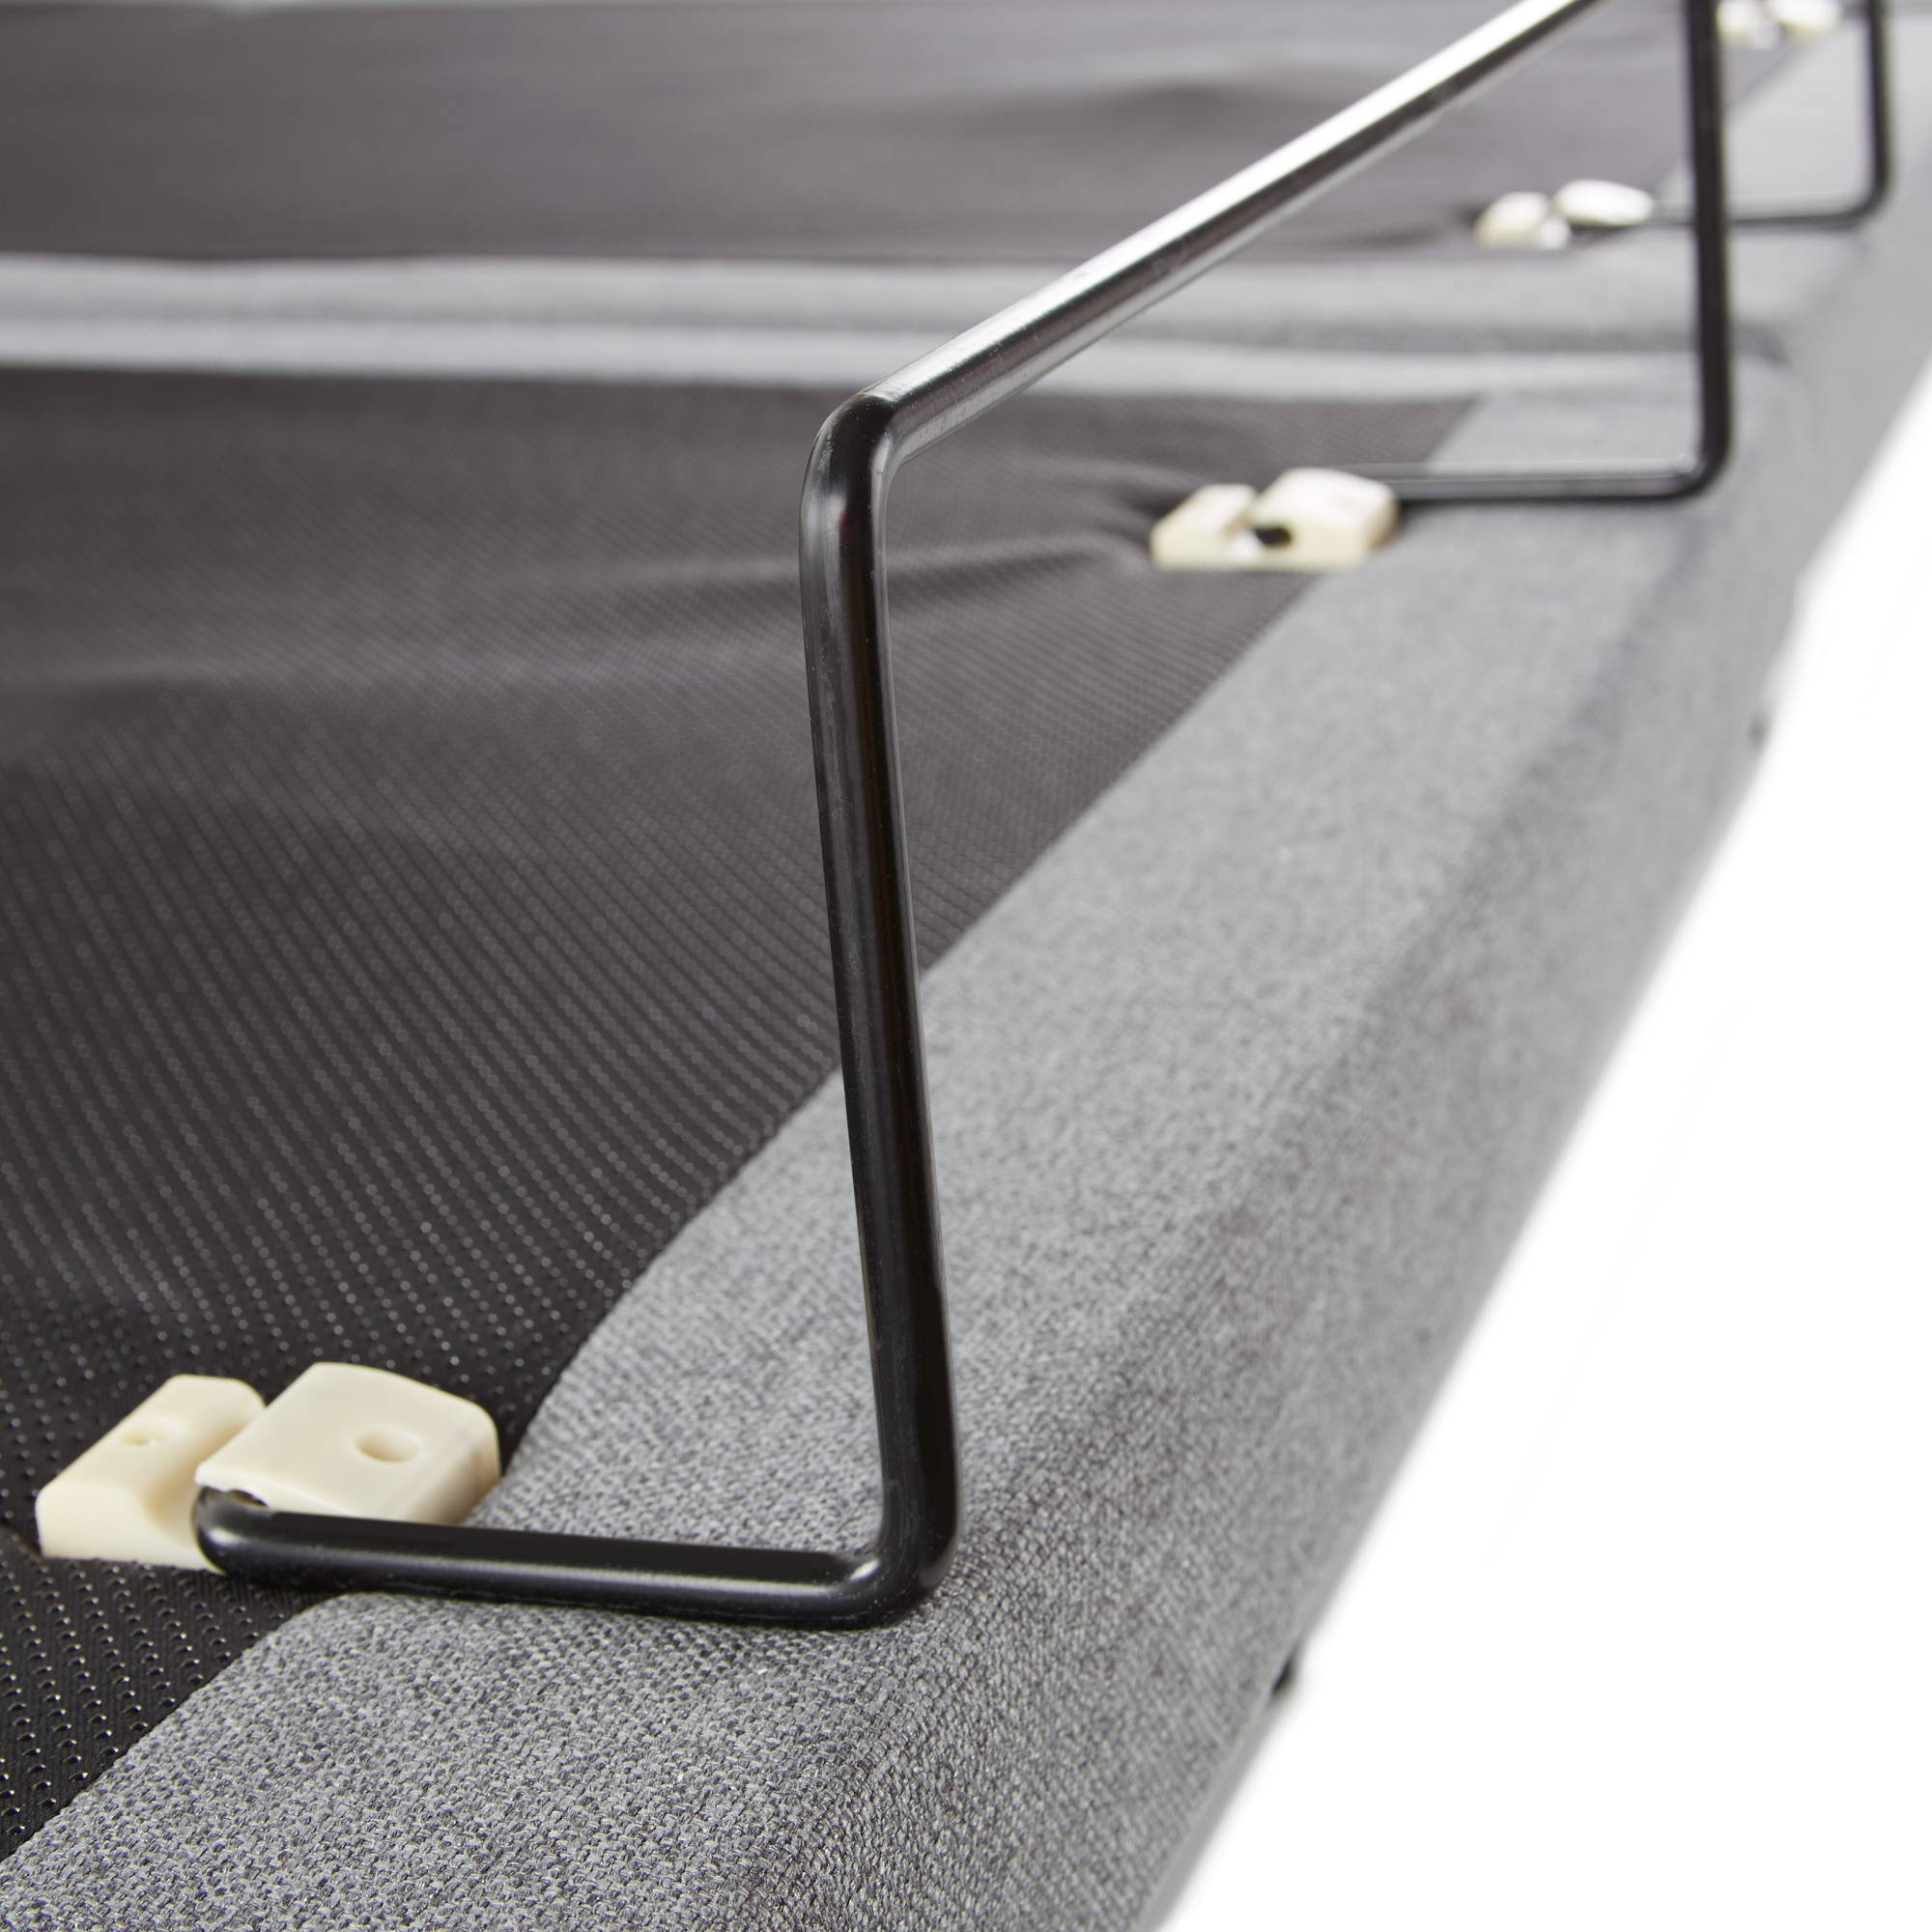 Retainer bar at the end of the adjustable base helps to keep your mattress in place.